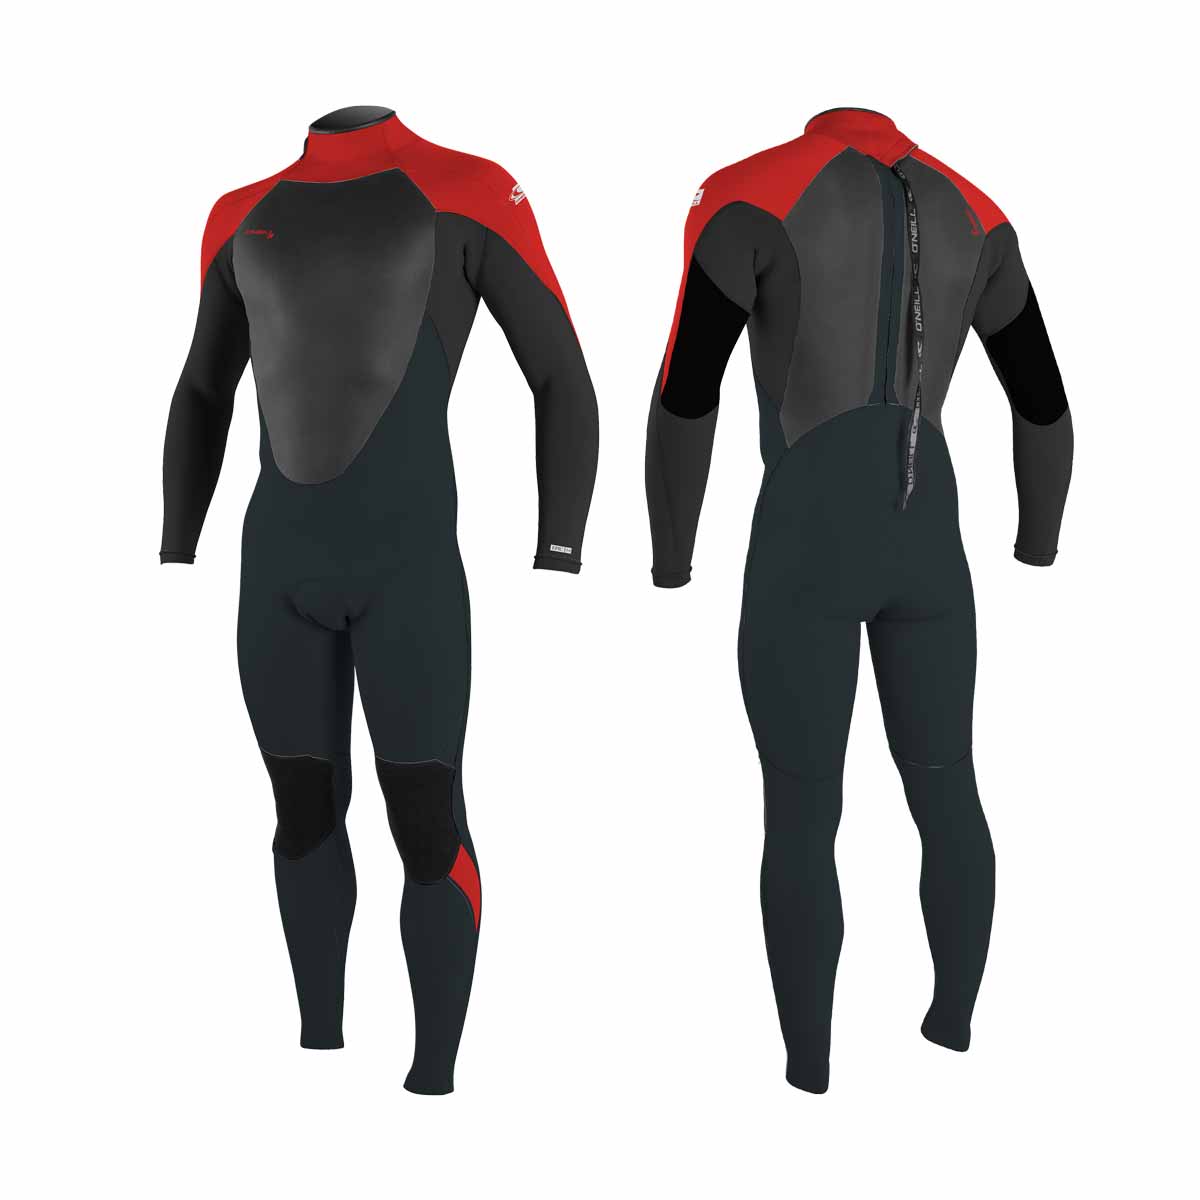 O'Neill Youth Epic full 5/4 mm Wetsuit – Gunmet/Black/Red GS9